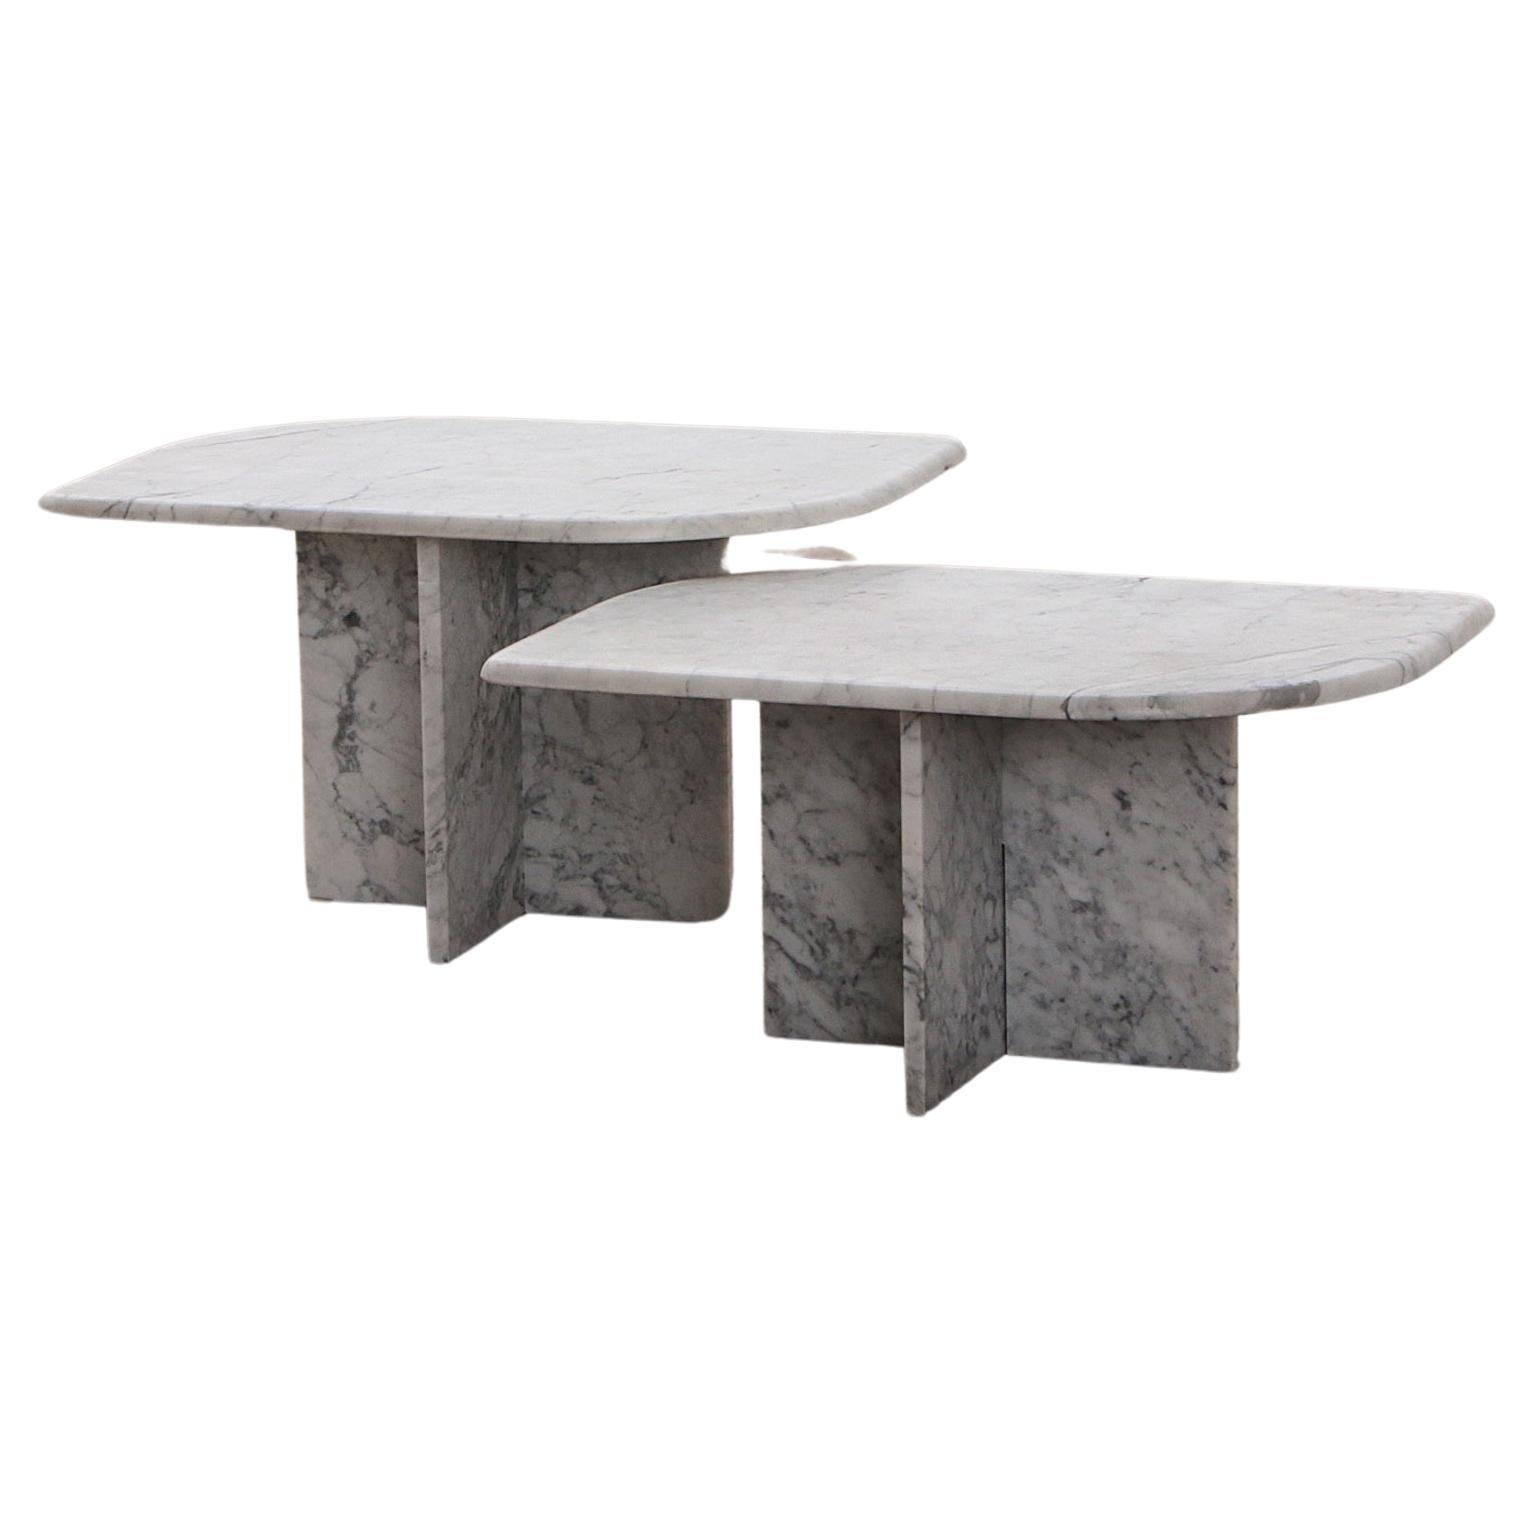 Set of Two Marble Tables - Italian Design, 1980s